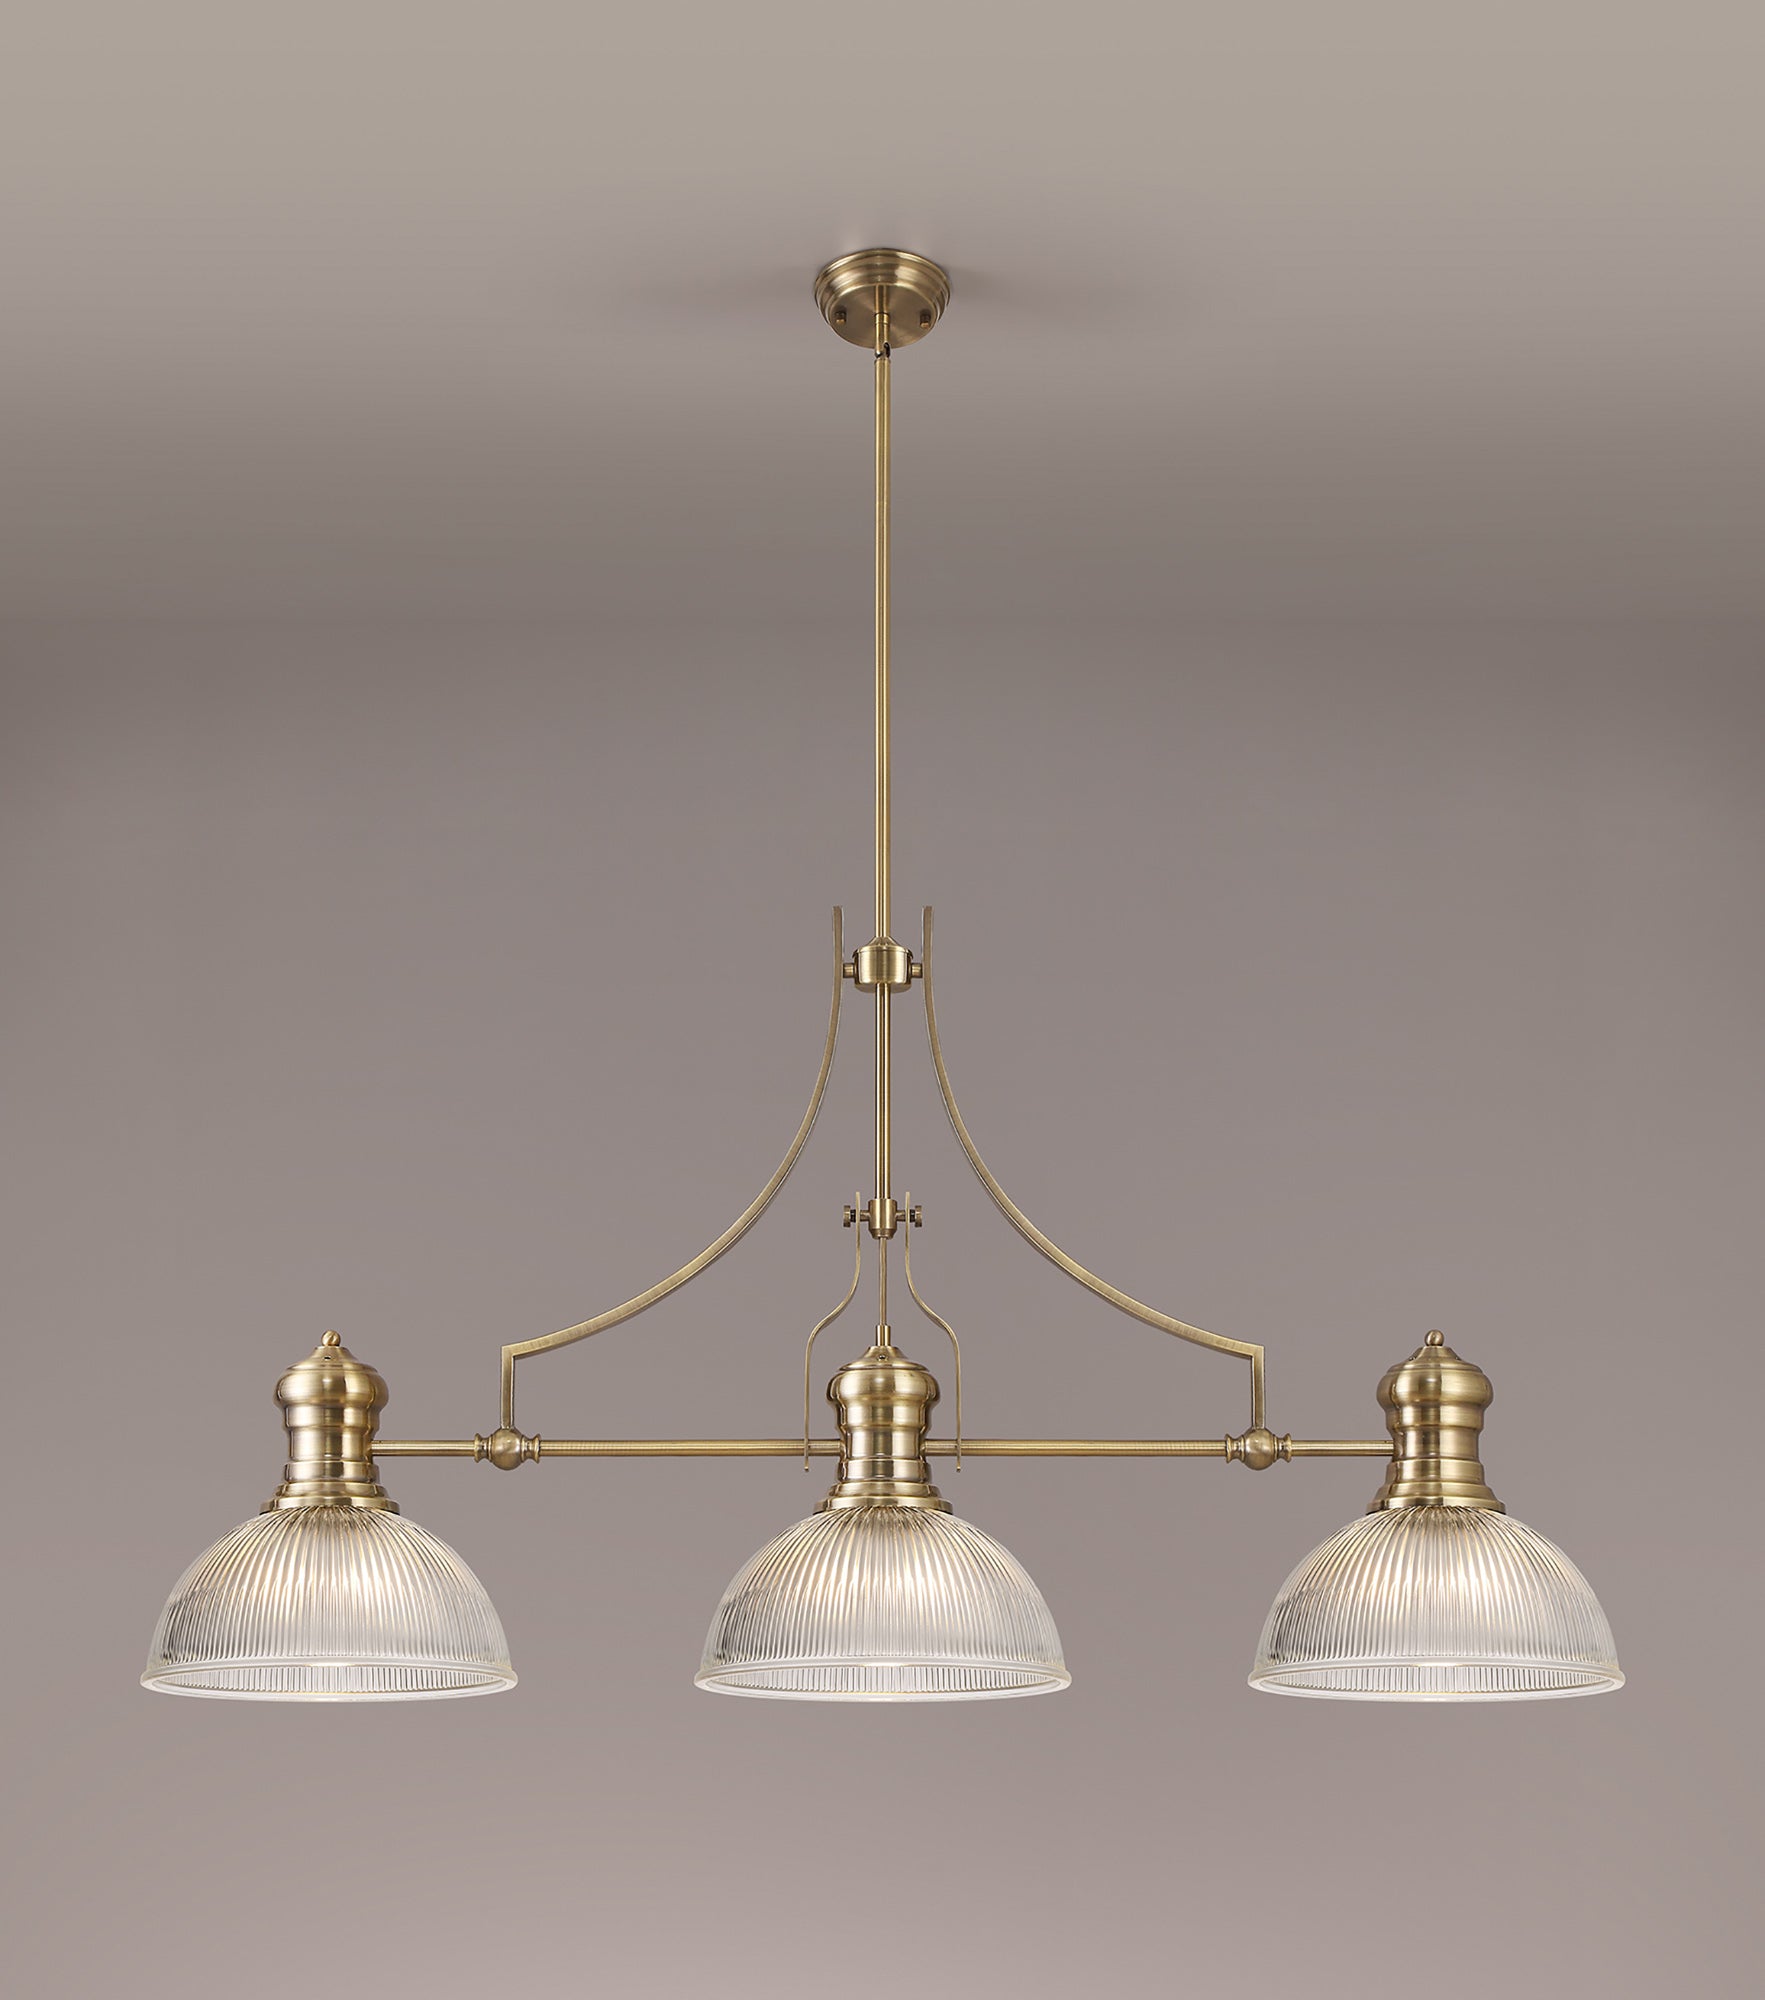 Docker 3 Light Linear Pendant E27 With 30cm Dome Glass Shade, Antique Brass, Clear